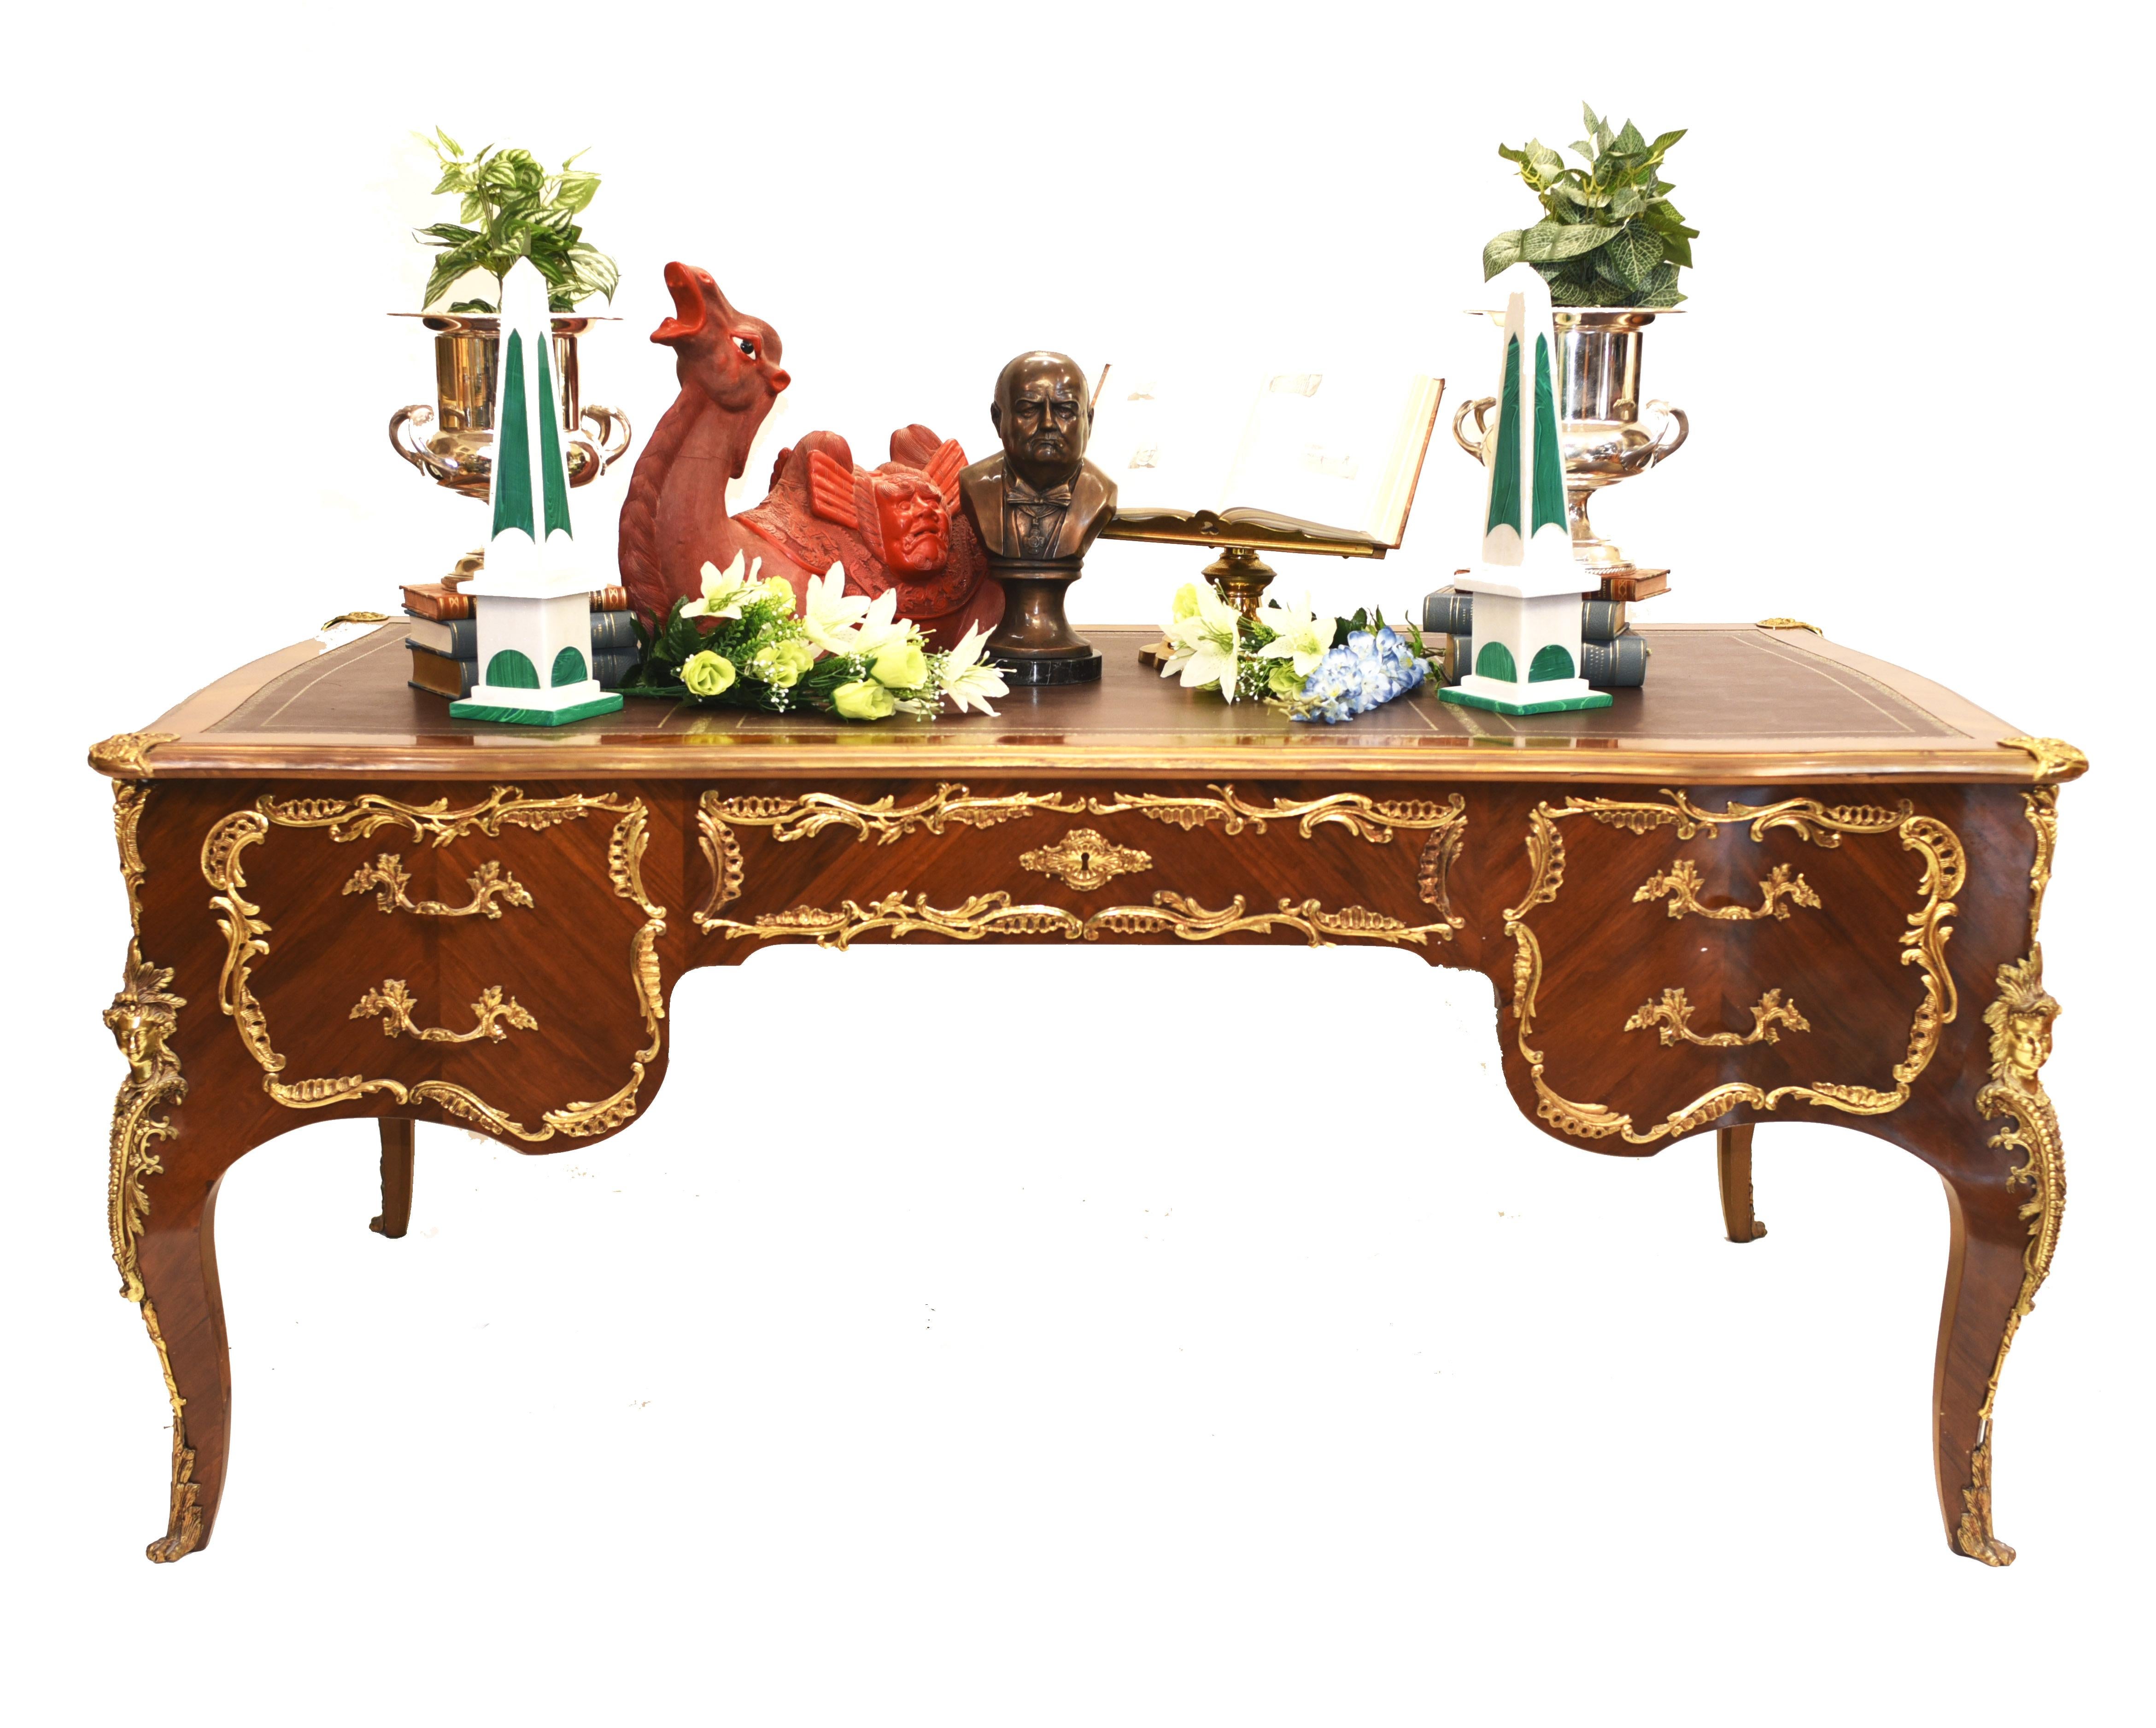 Gorgeous French Empire bureau plat 
Classic French antique desk in kingwood with ormolu fixtures
We date this desk to circa 1930
Has drawers on both sides although one side they are decorative so this is a dummy partners desk
Great for a home